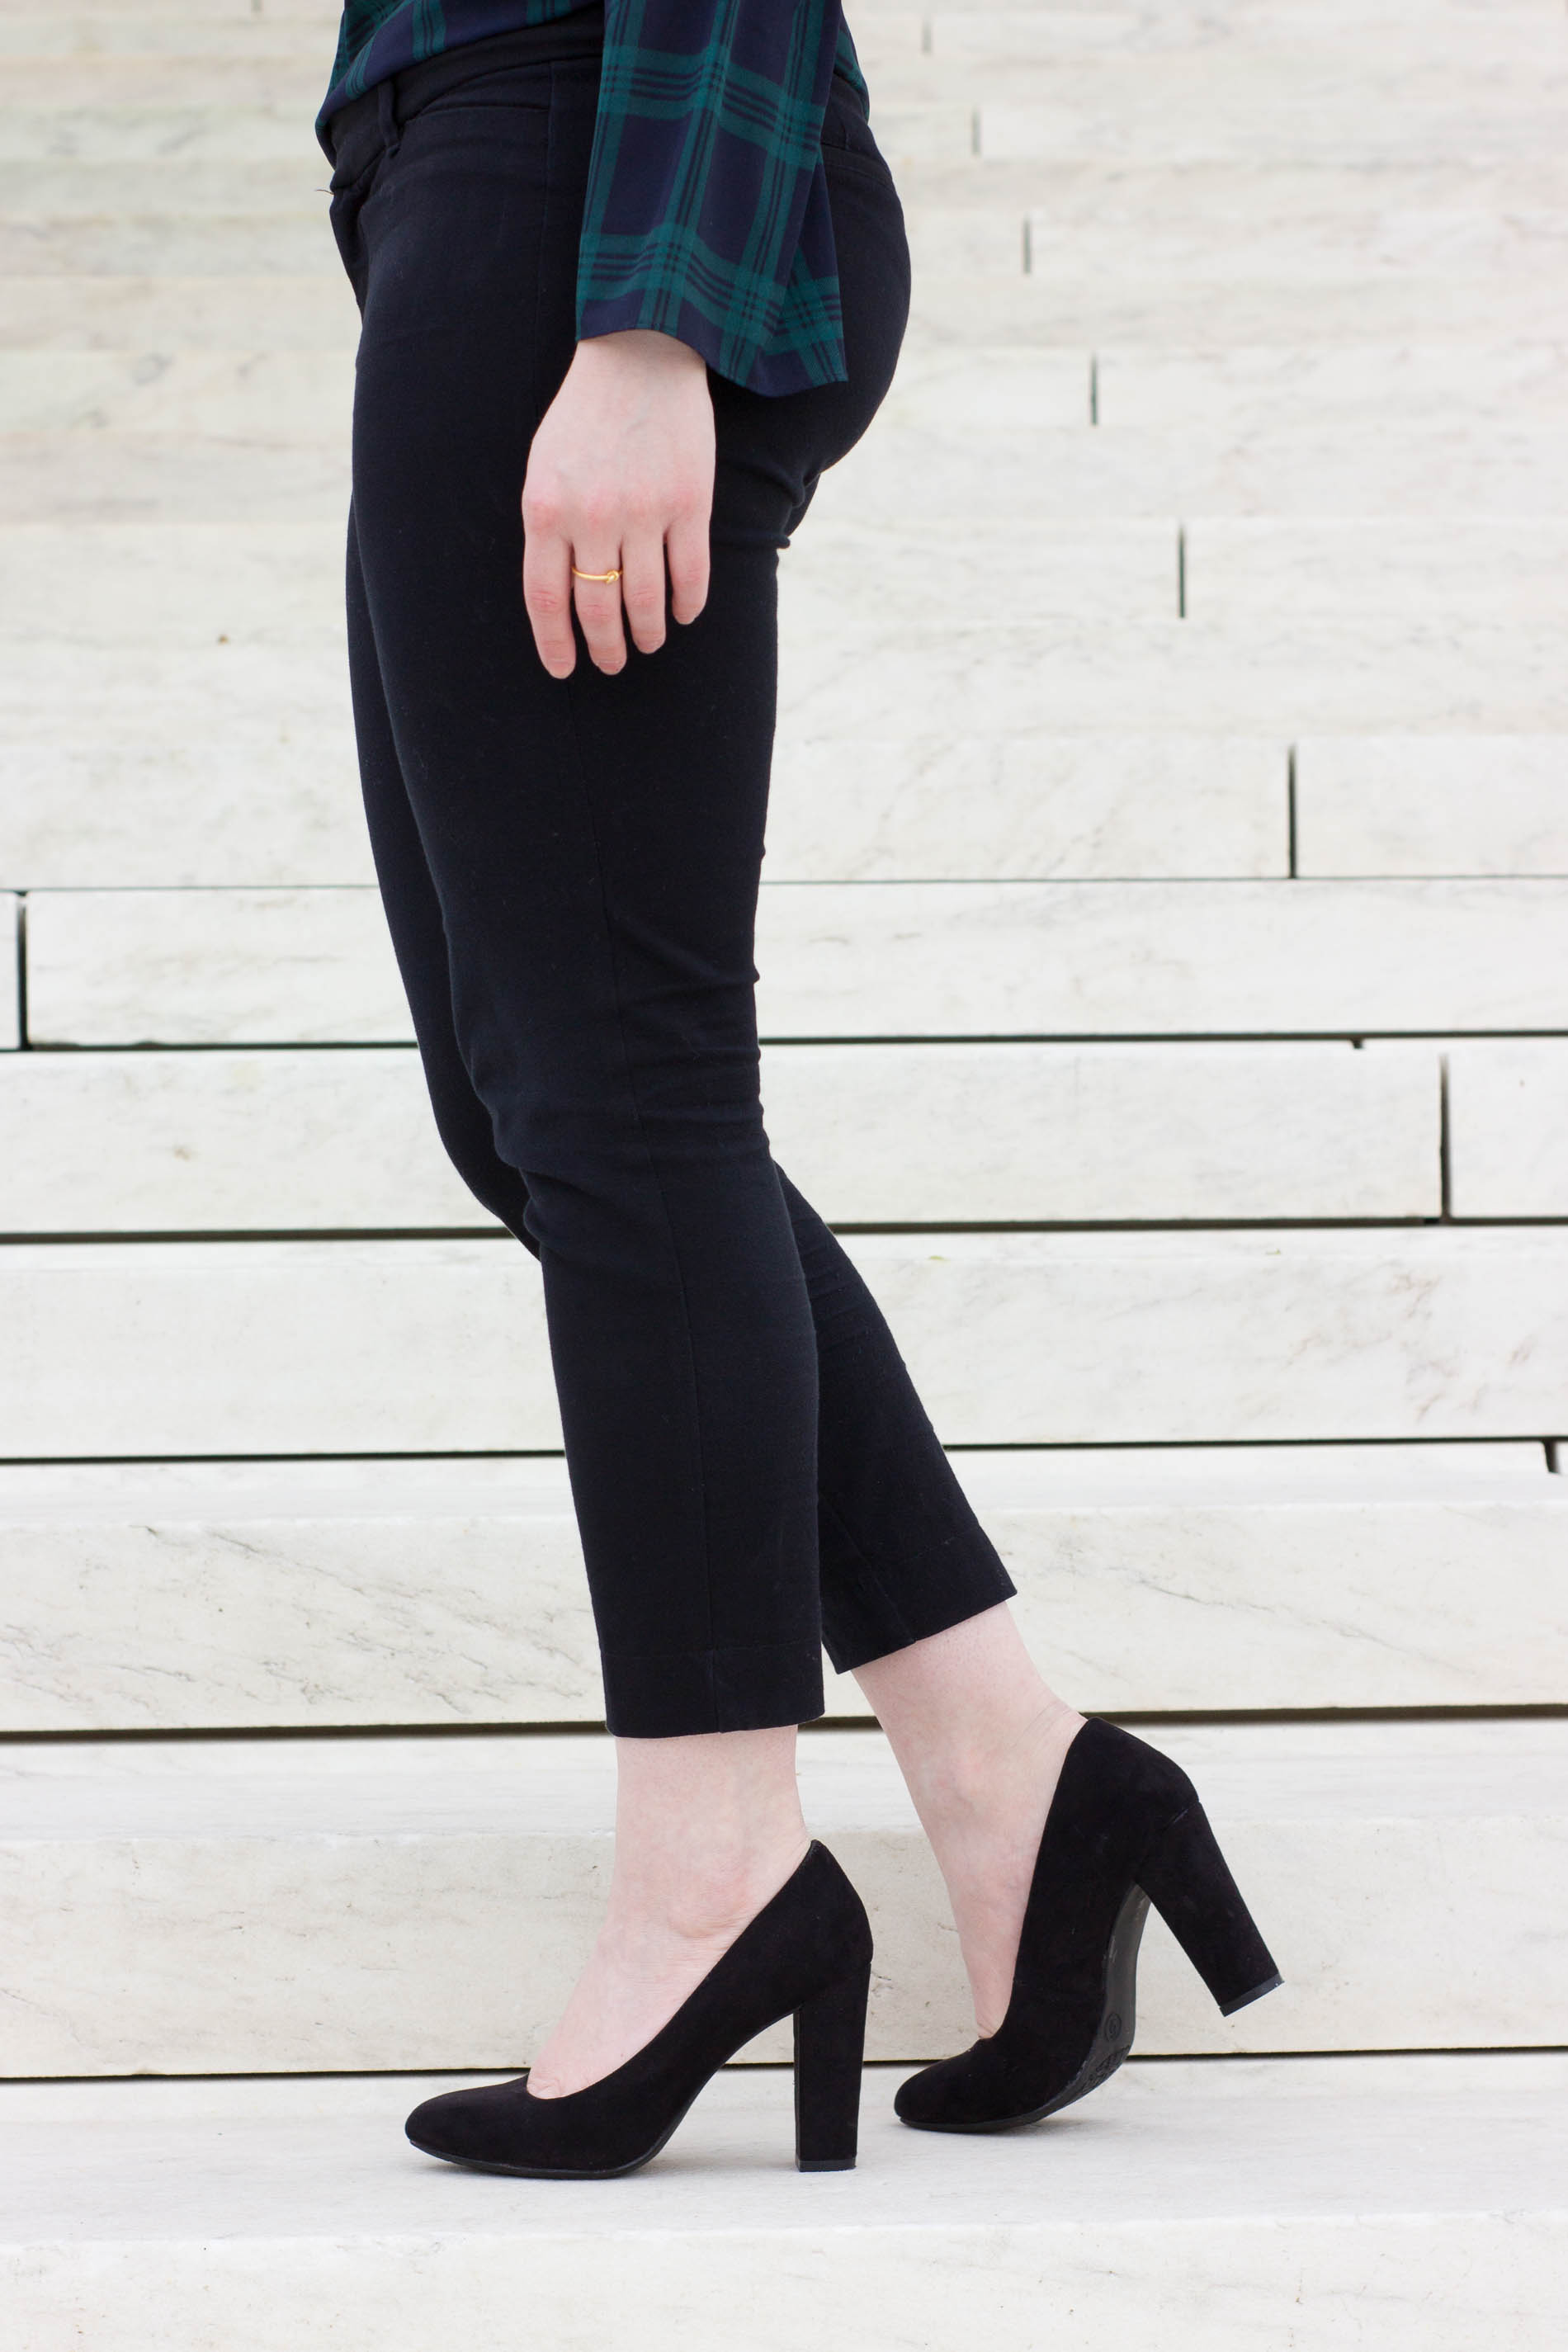 The Office Holiday Party | Something Good, @danaerinw, black pumps